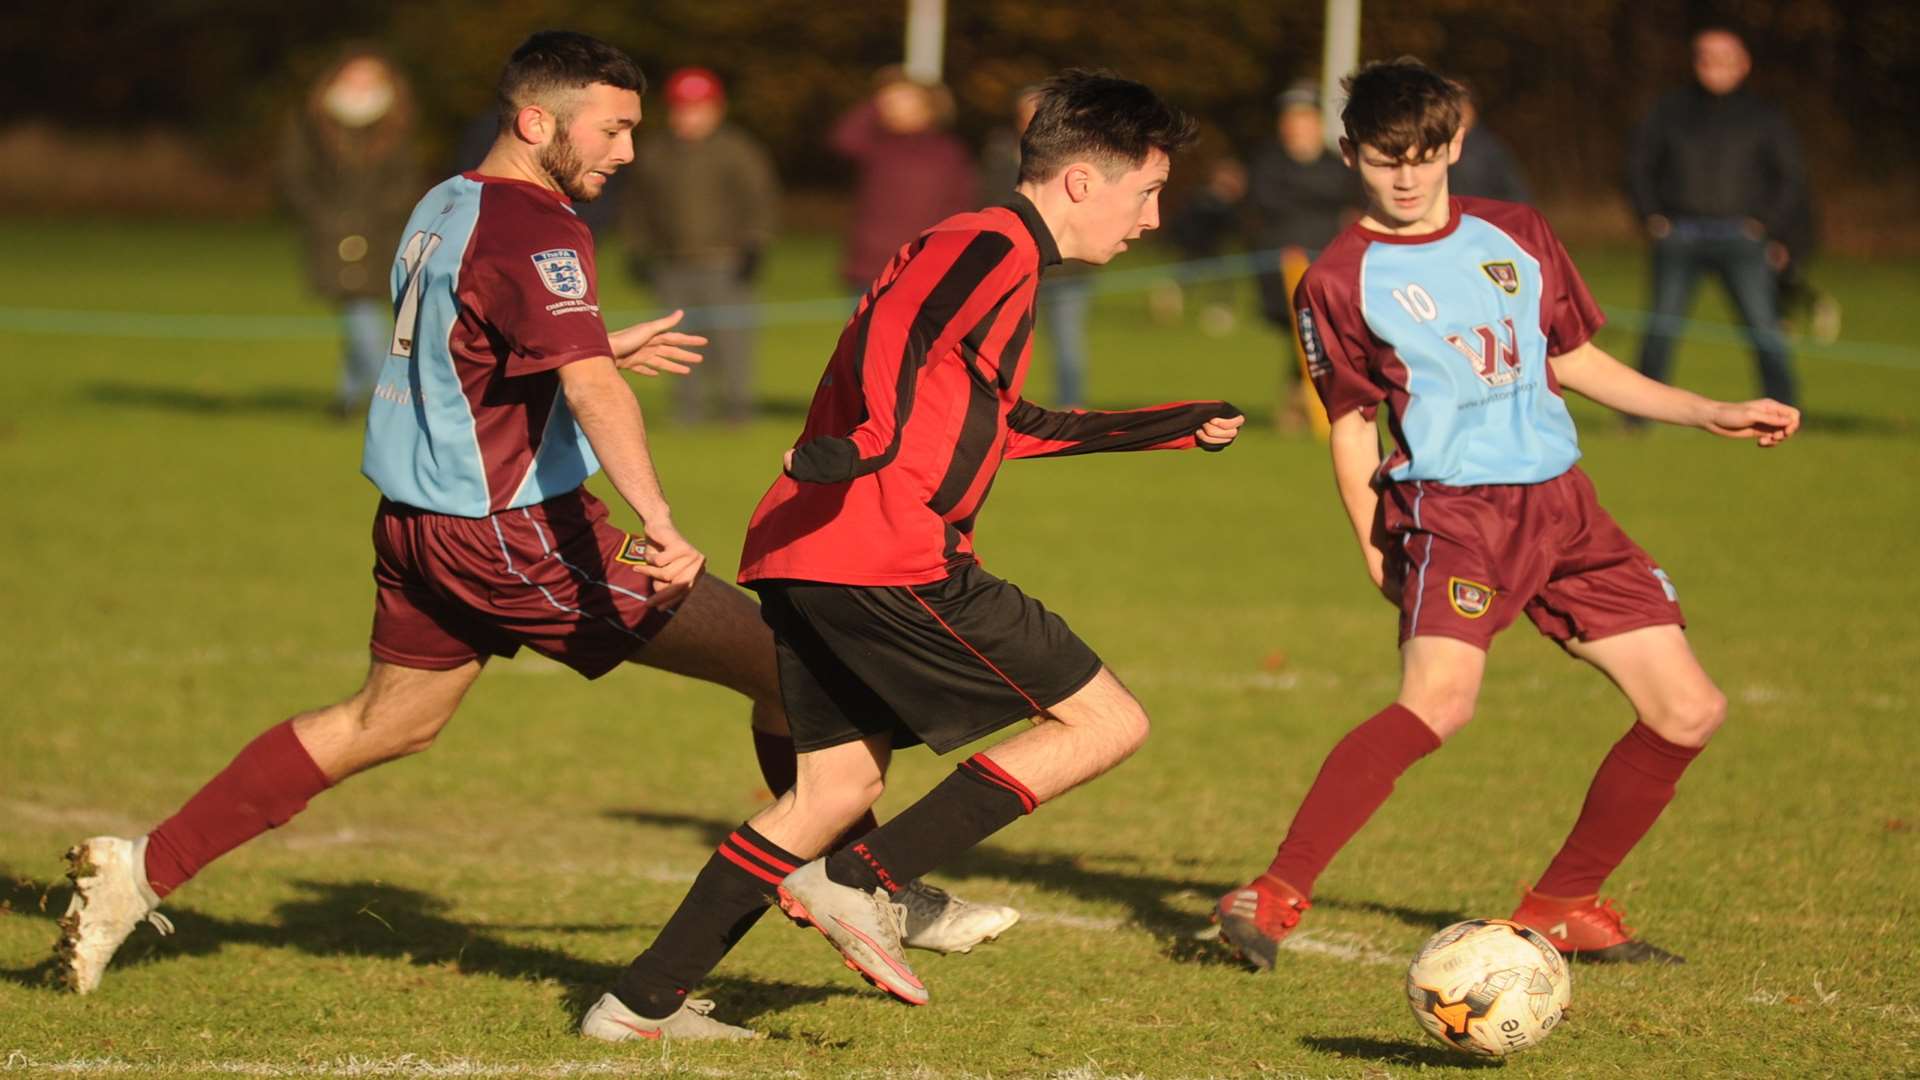 Meopham Colts Red make inroads against Wigmore Youth in Under-18 Division 1 Picture: Steve Crispe